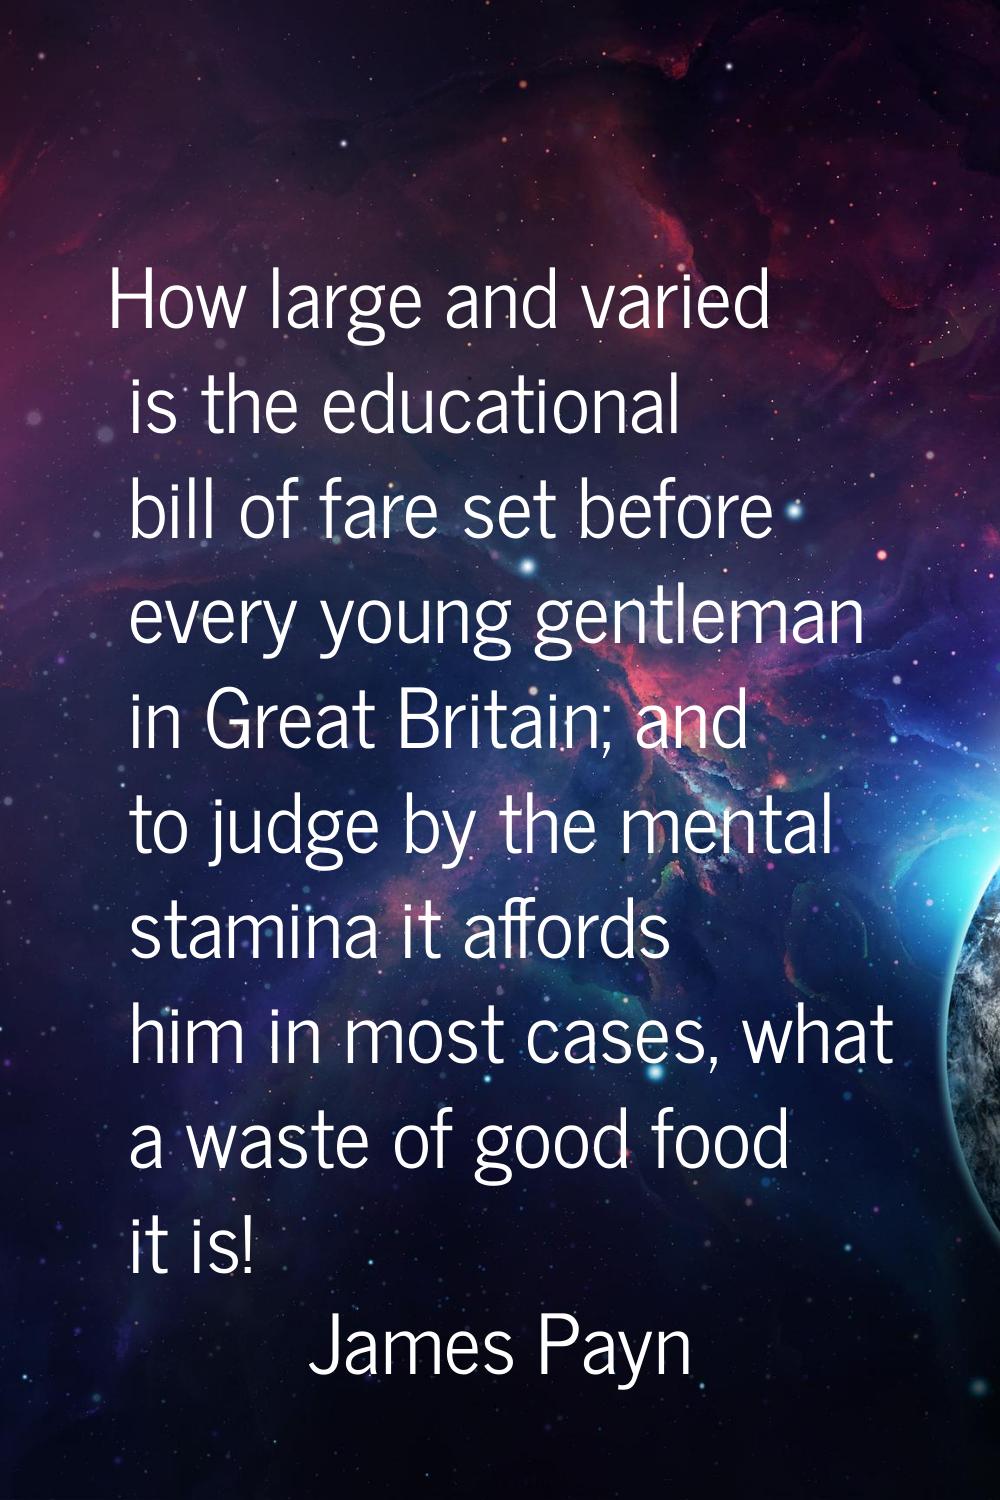 How large and varied is the educational bill of fare set before every young gentleman in Great Brit